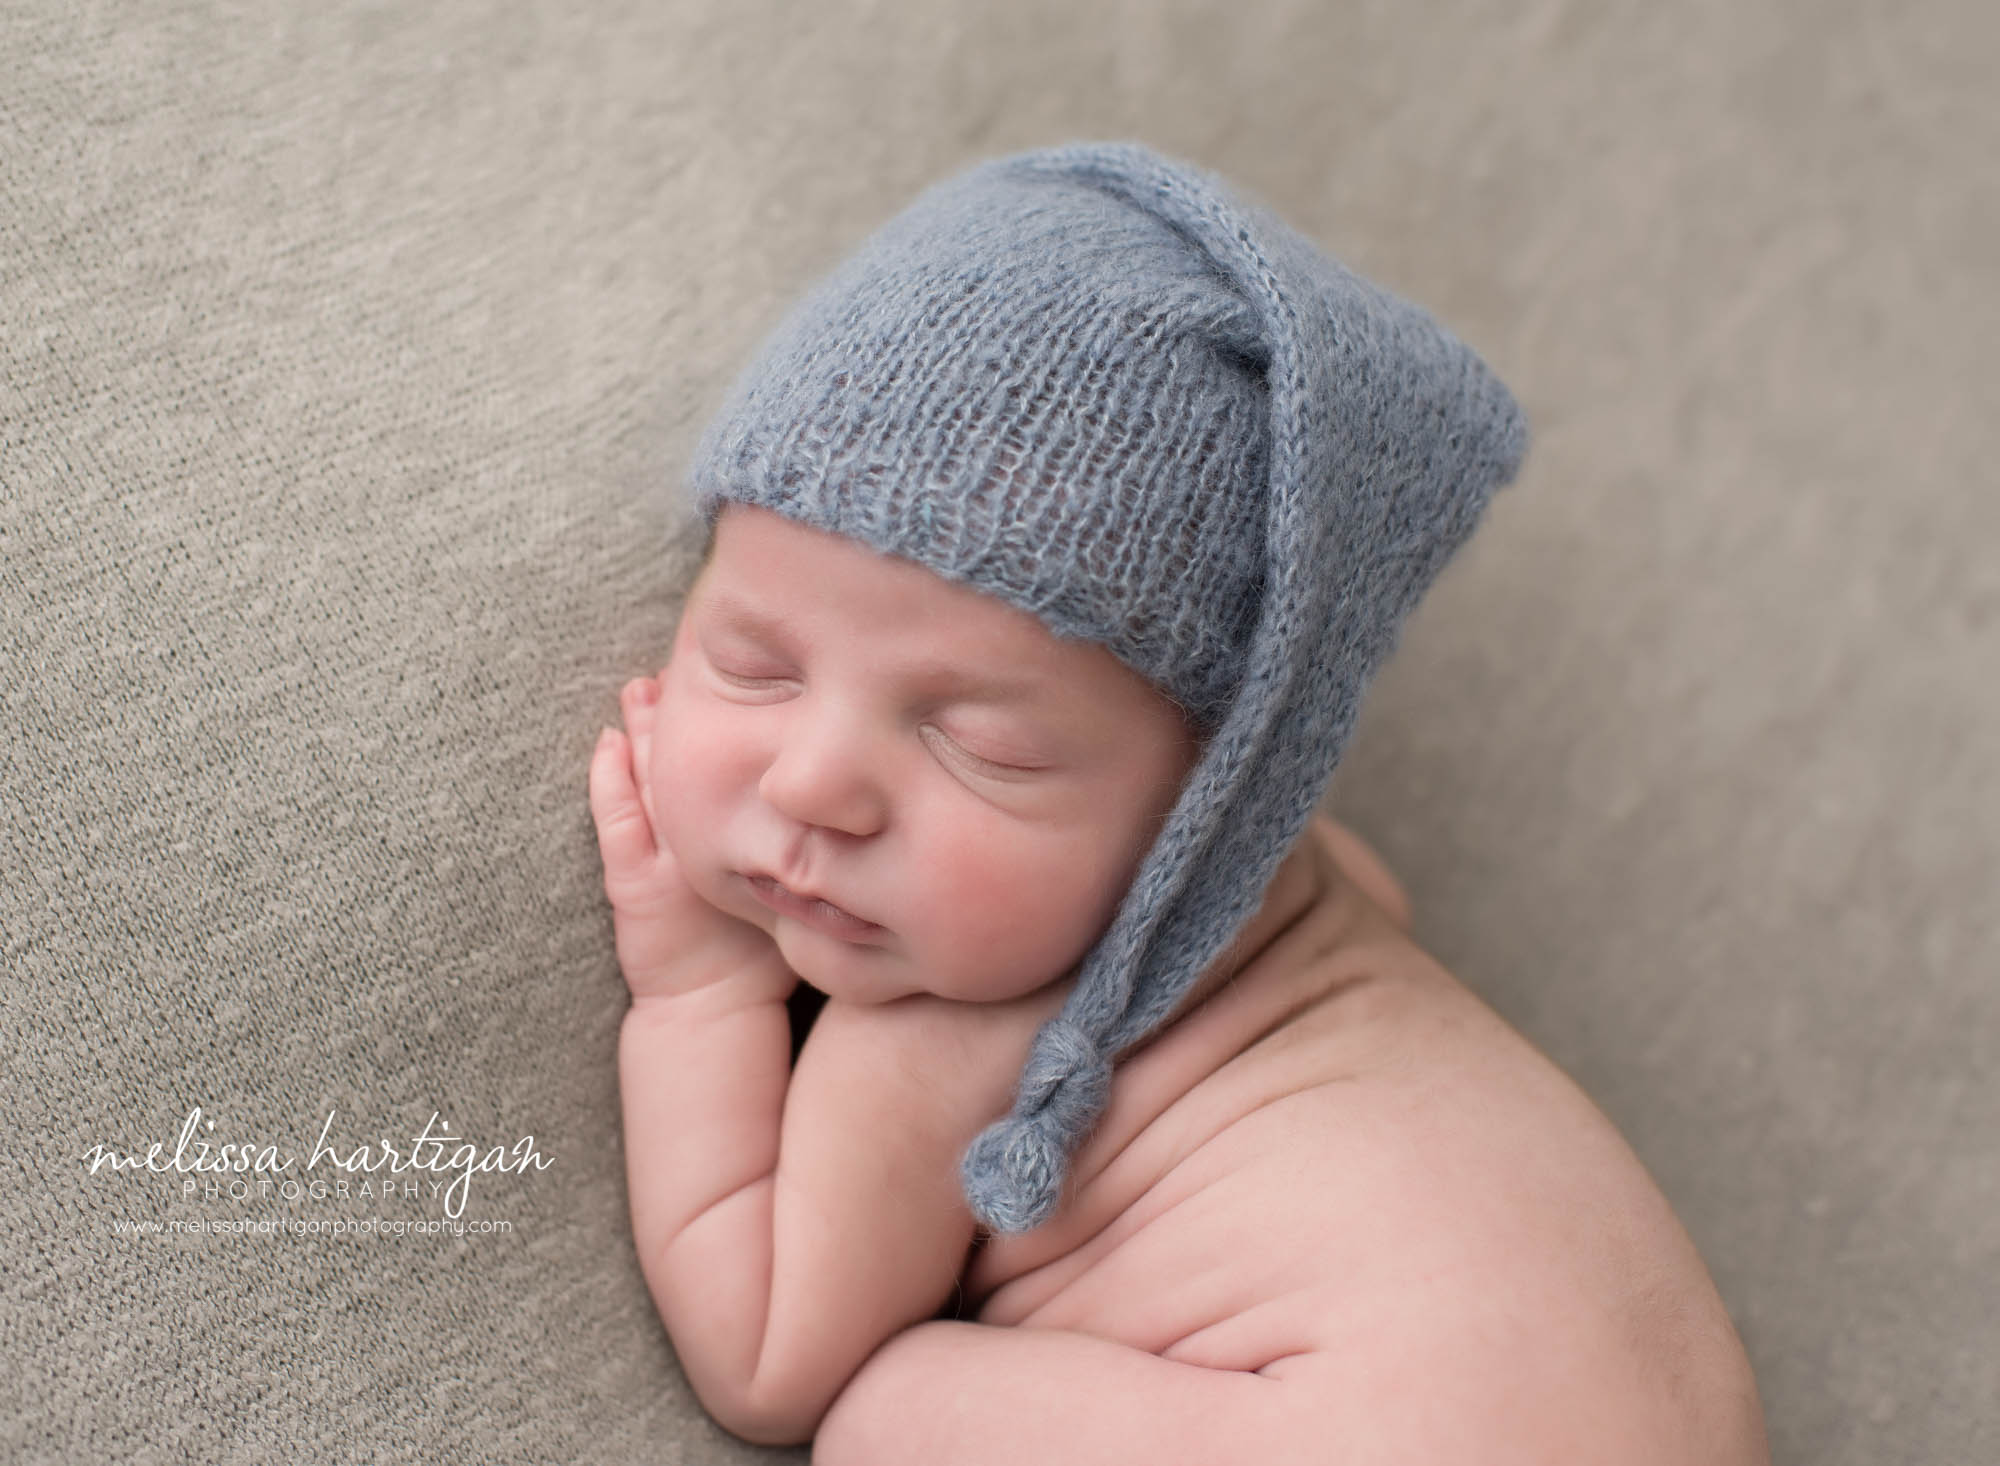 newborn baby boy posed on side with blue knitted sleepy cap baby photography MA